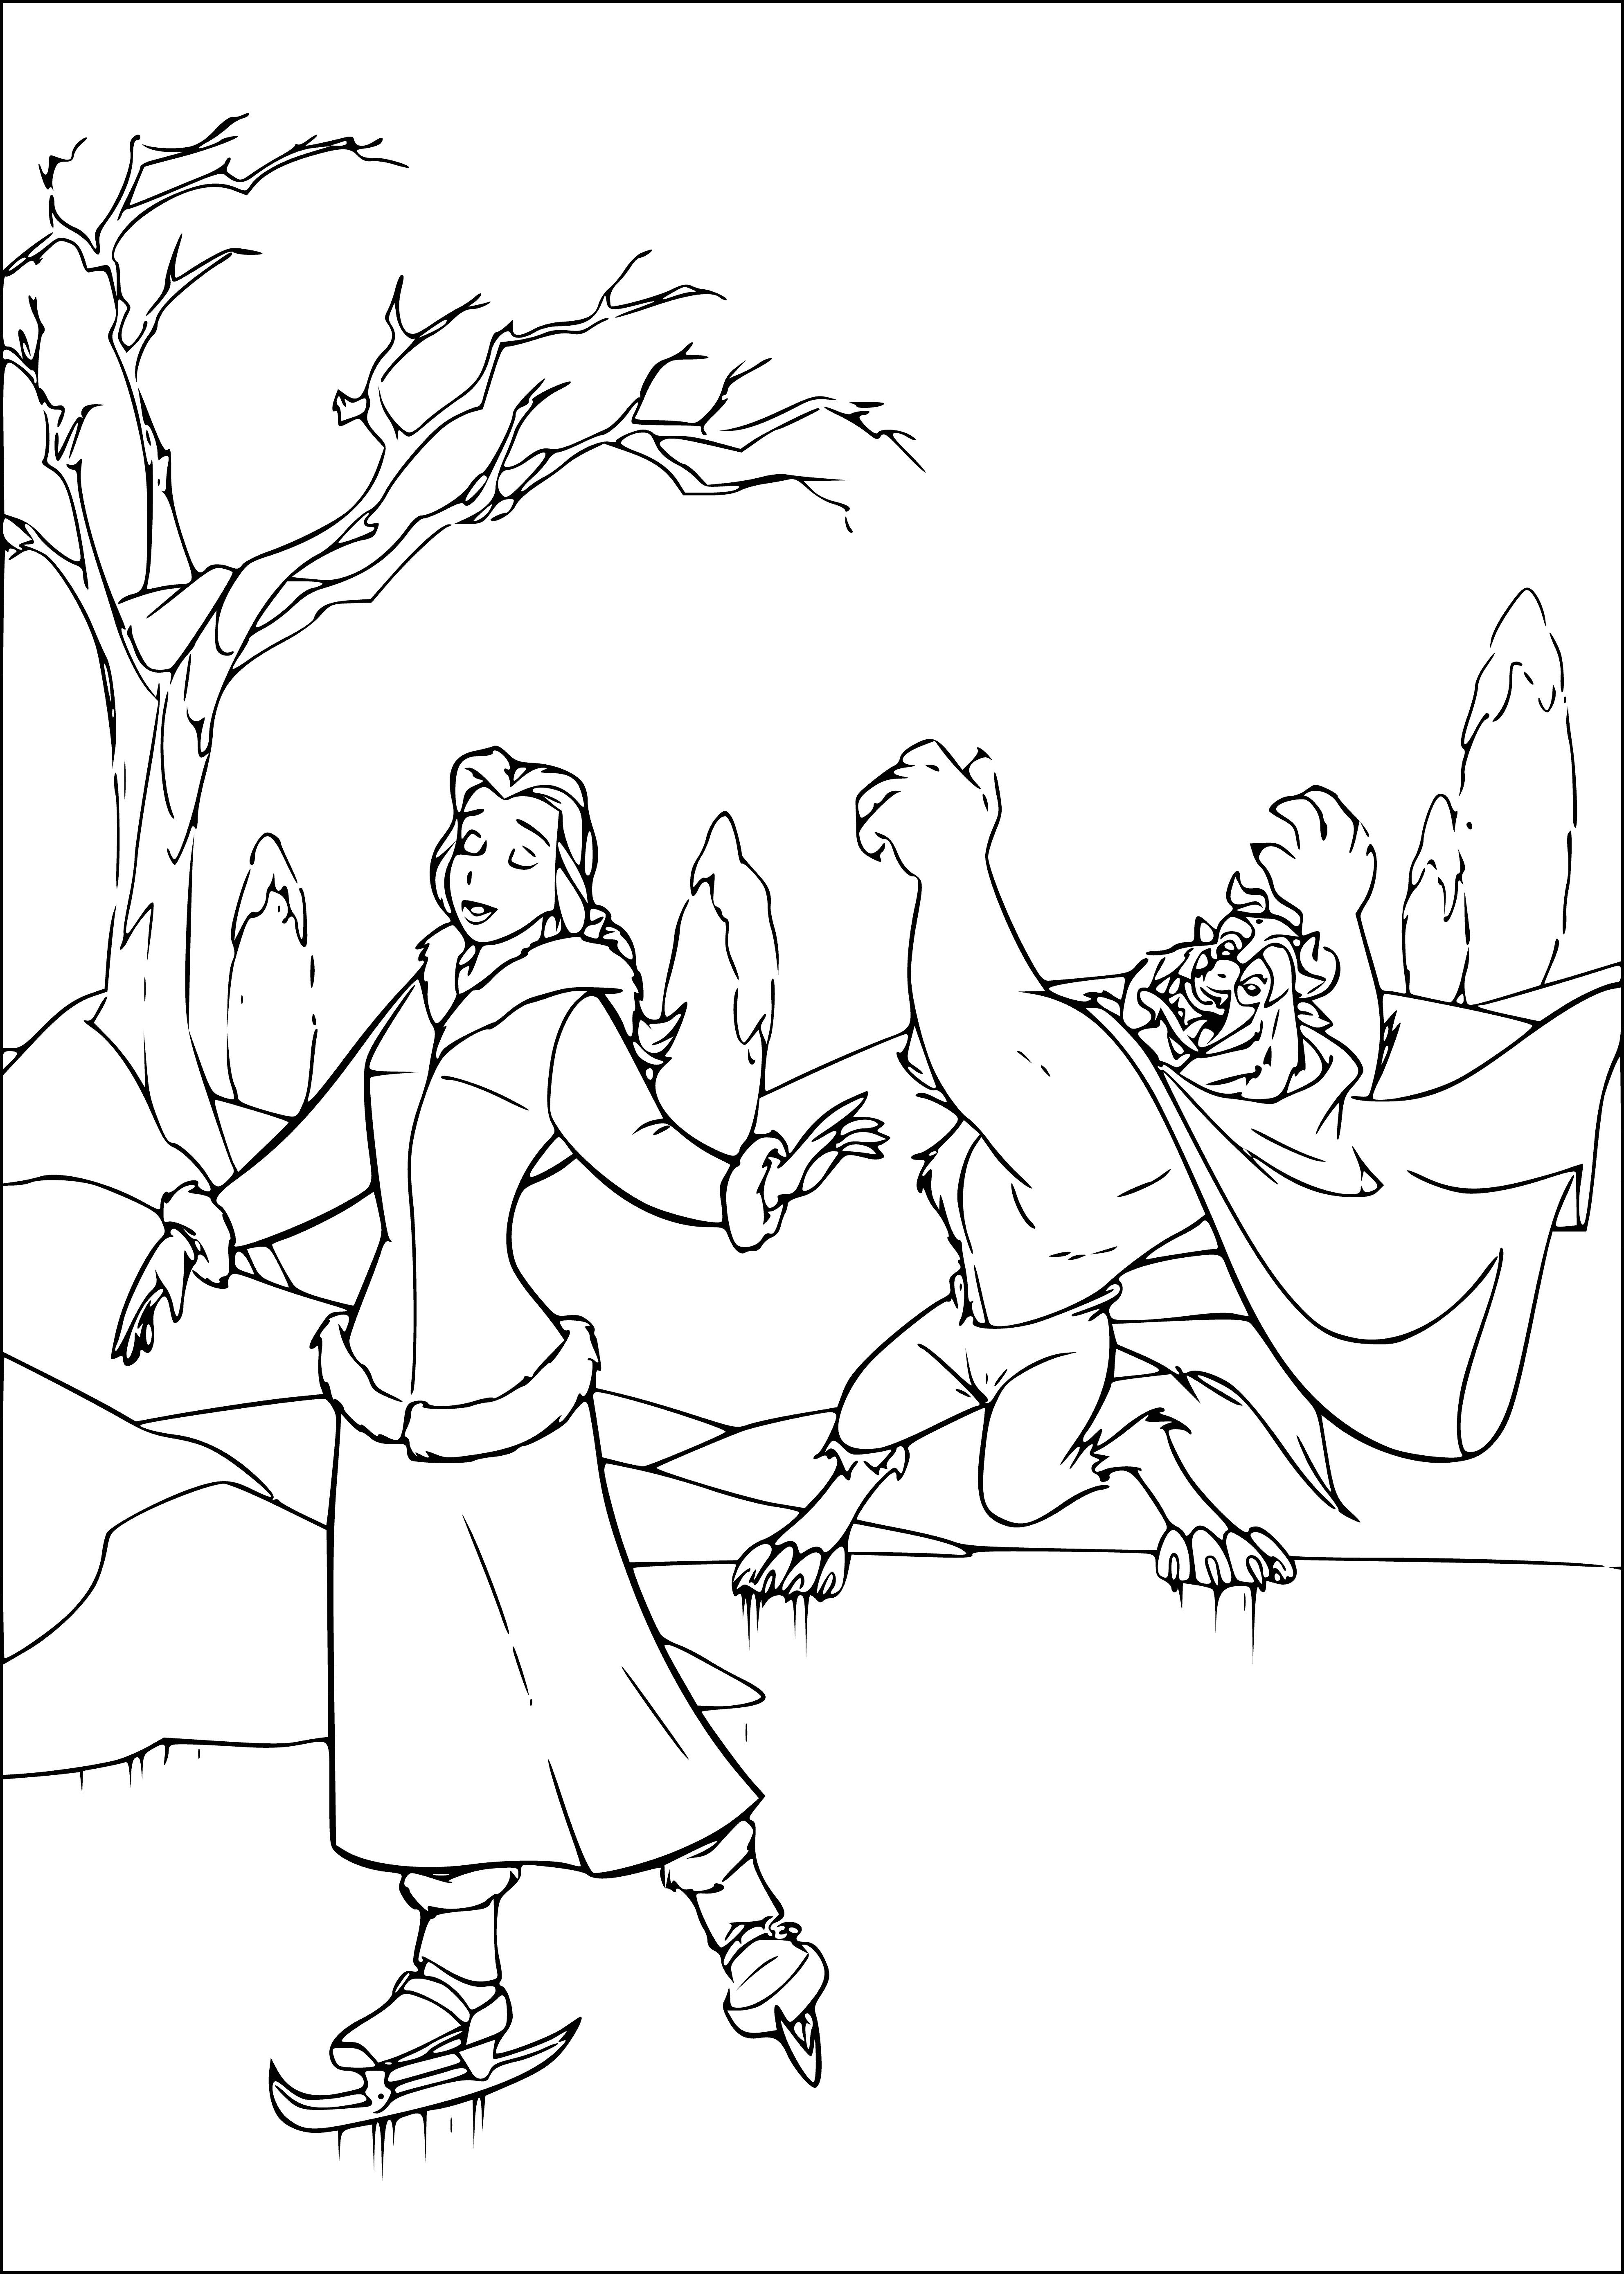 coloring page: Stage with rink & castle backdrop; trees surround it; skaters in white dress and blue suit. #iceskating